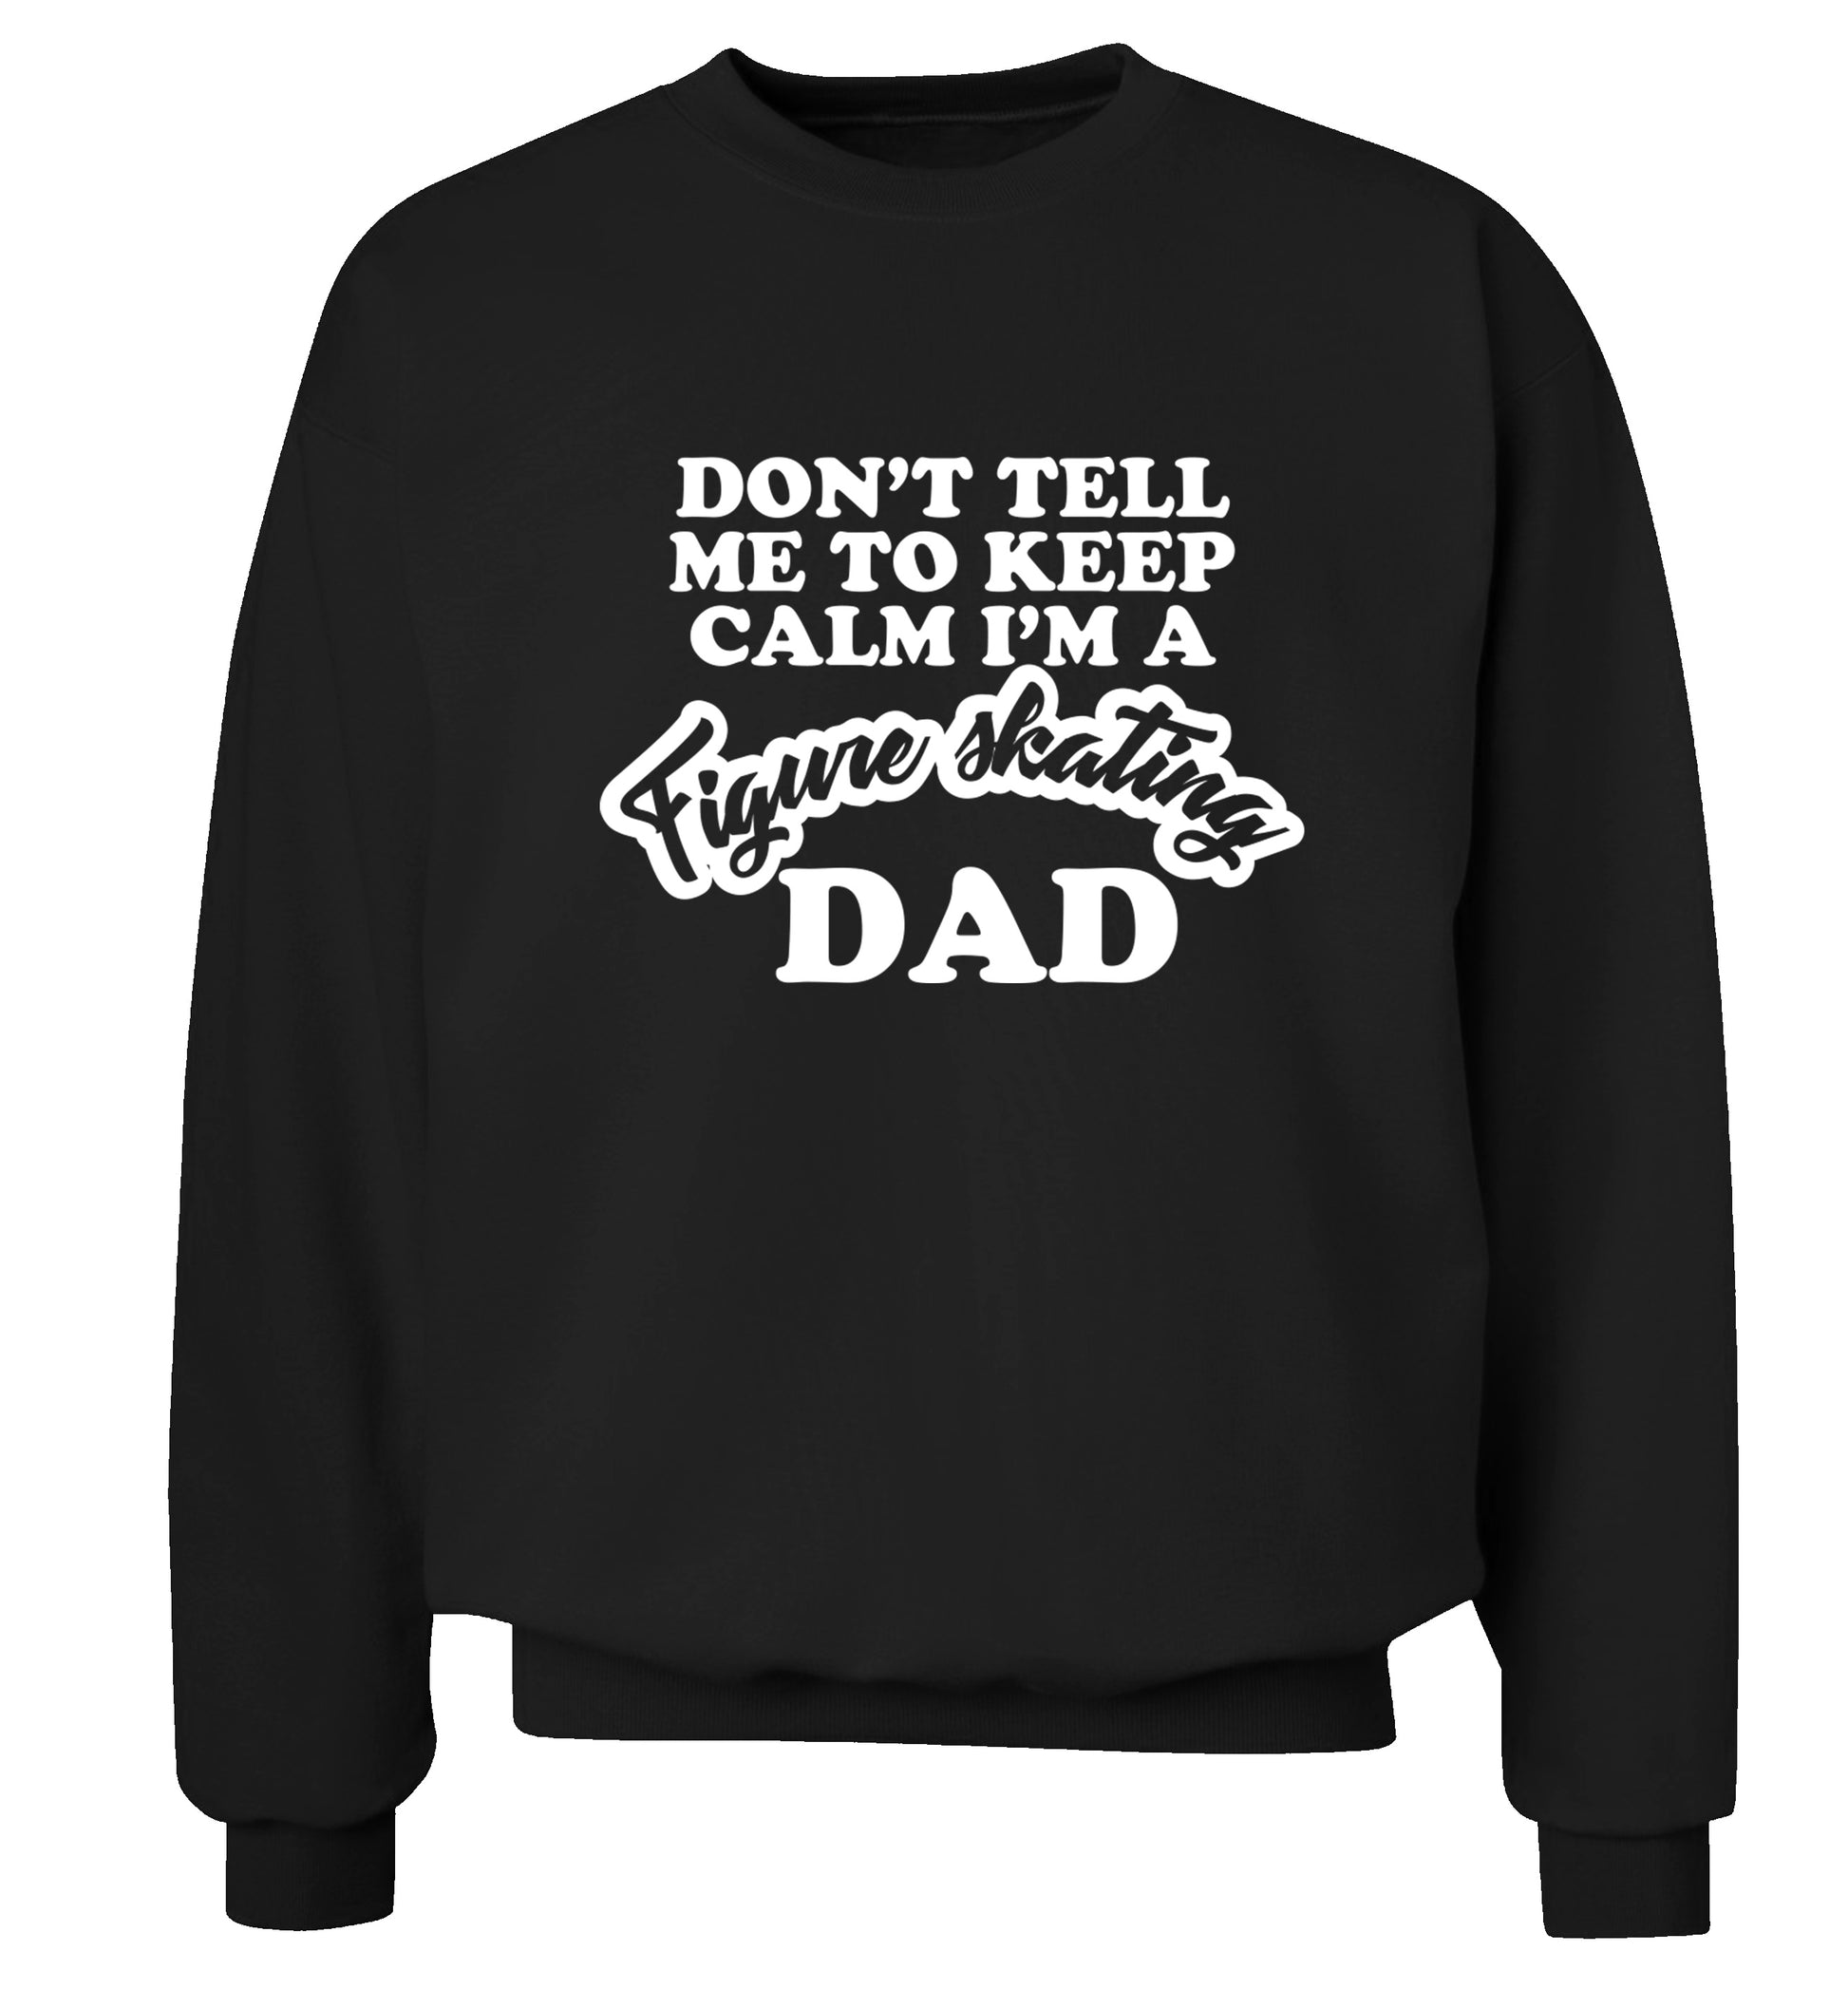 Don't tell me to keep calm I'm a figure skating dad Adult's unisexblack Sweater 2XL